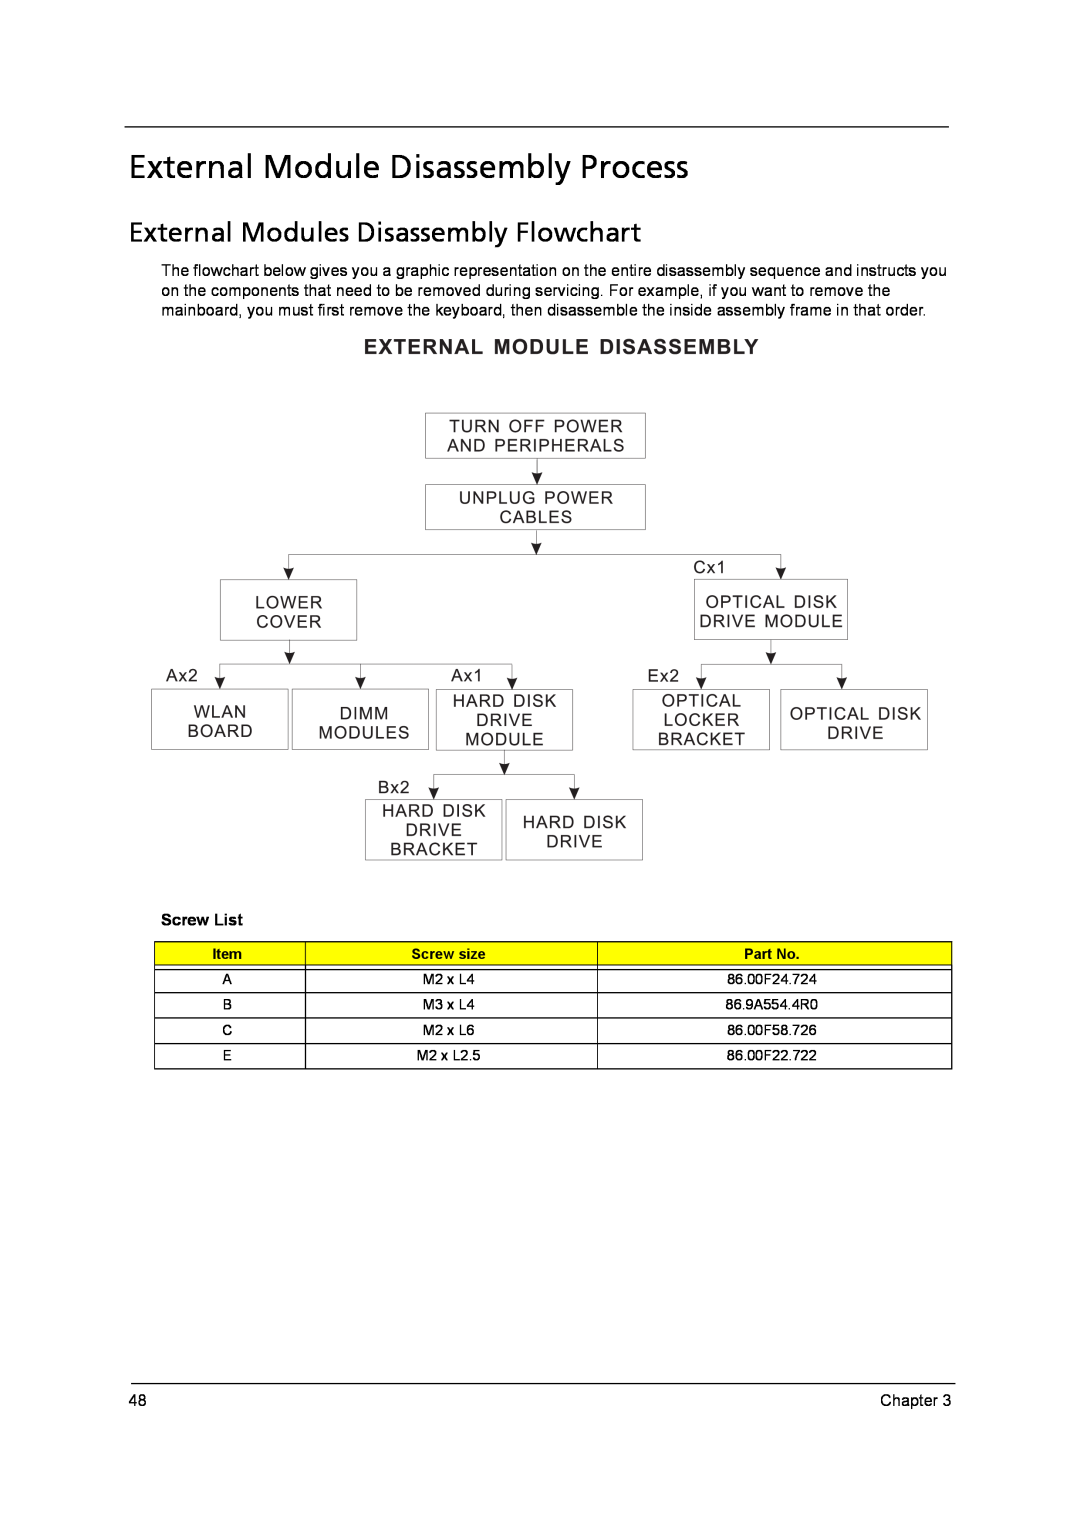 Acer 4315 manual External Module Disassembly Process, External Modules Disassembly Flowchart, Screw List 